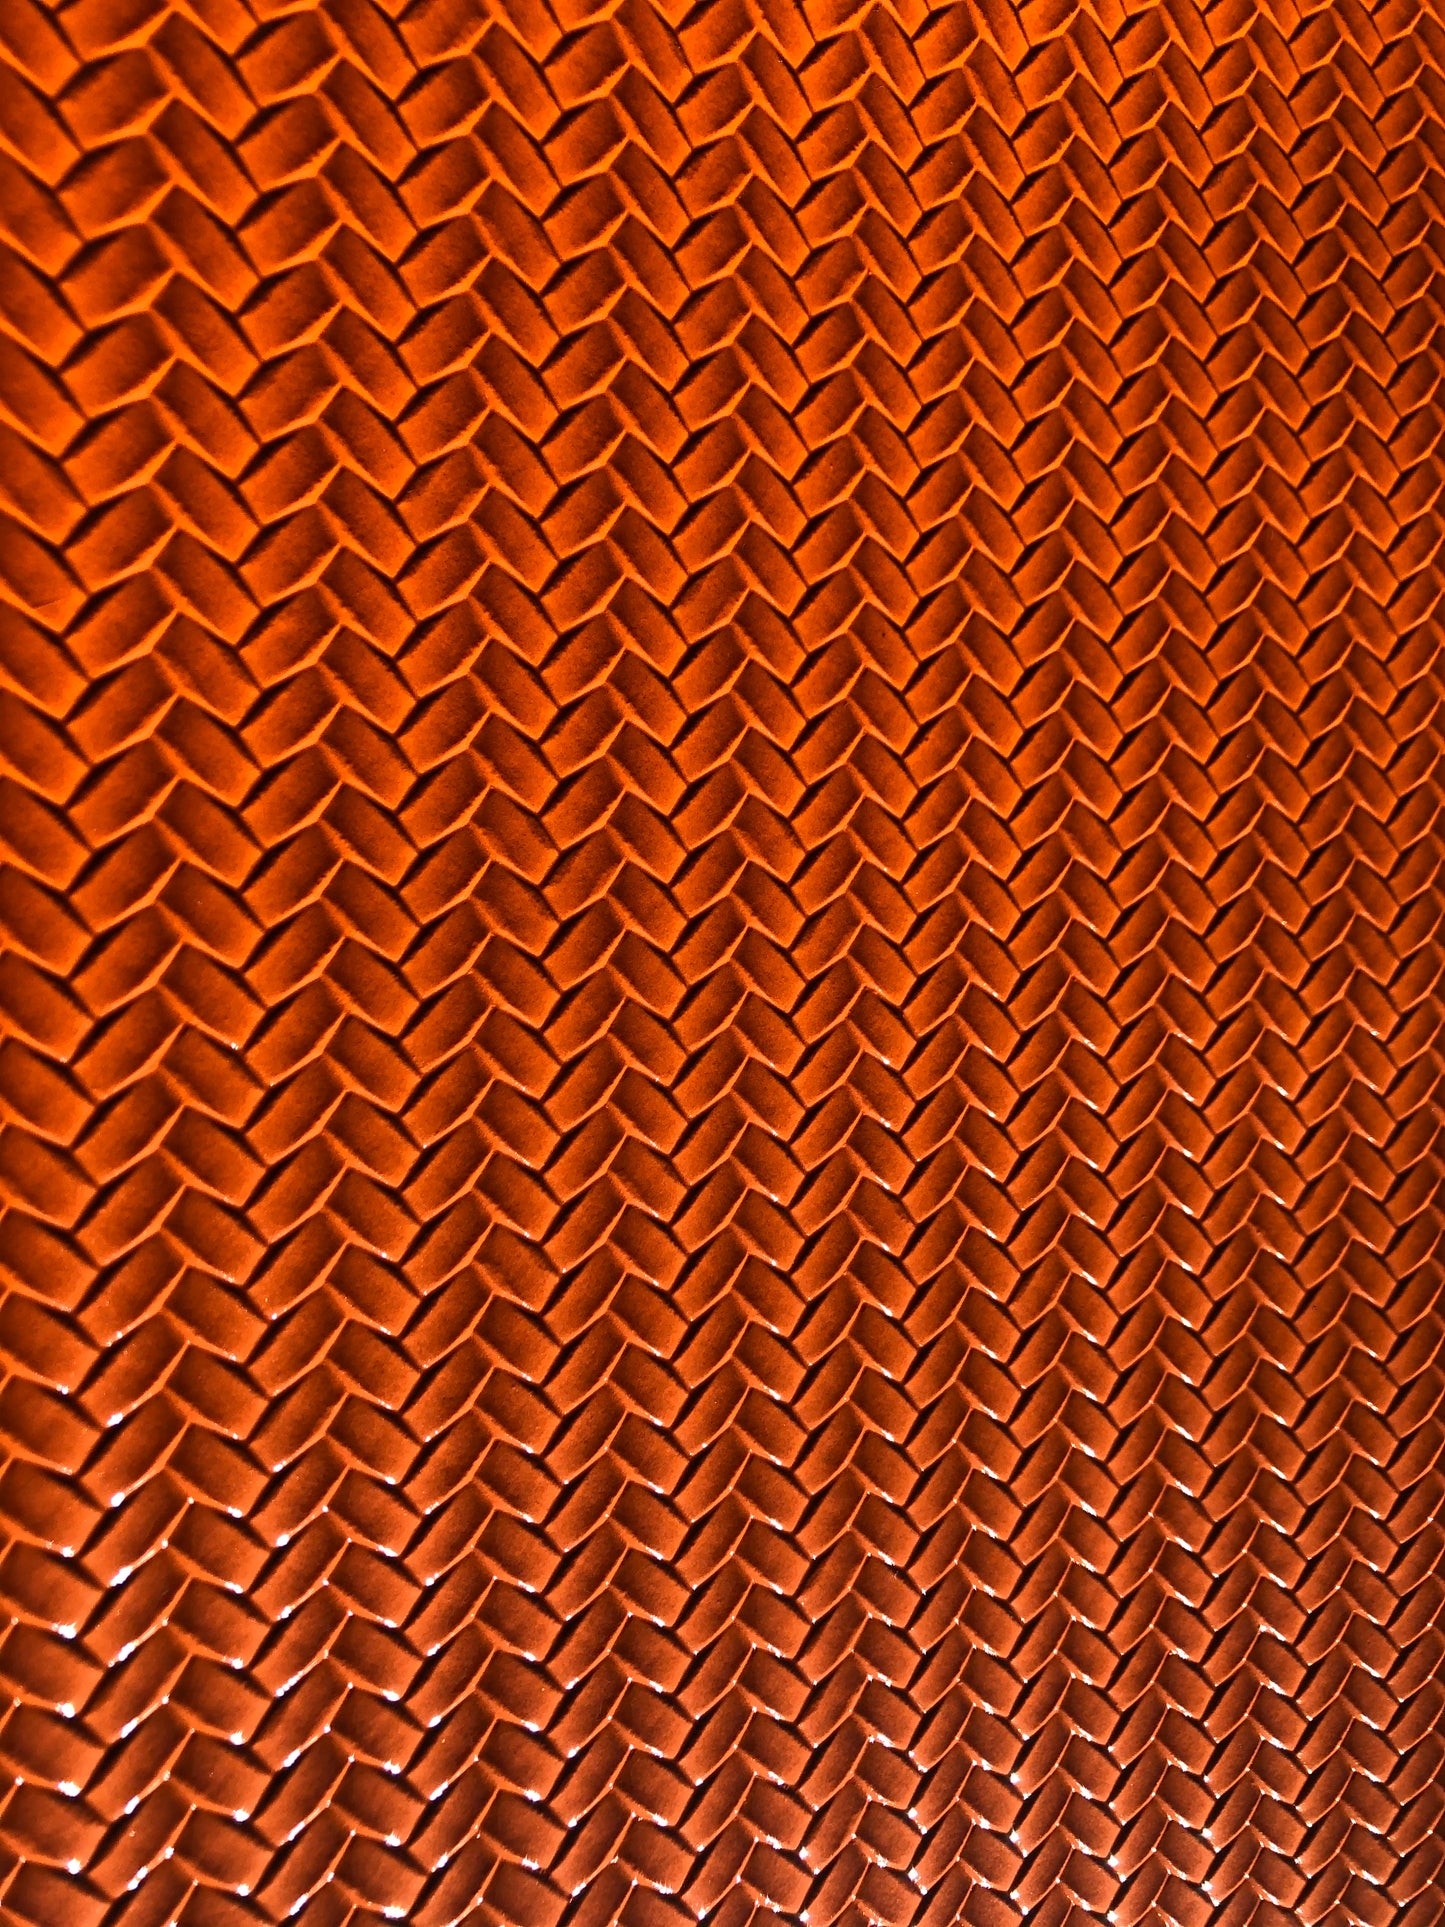 Basket weave Vinyl, textured faux leather, synthetic leather, Vegan Pleather, artificial leather for bags, garments, and upholstery by the meter